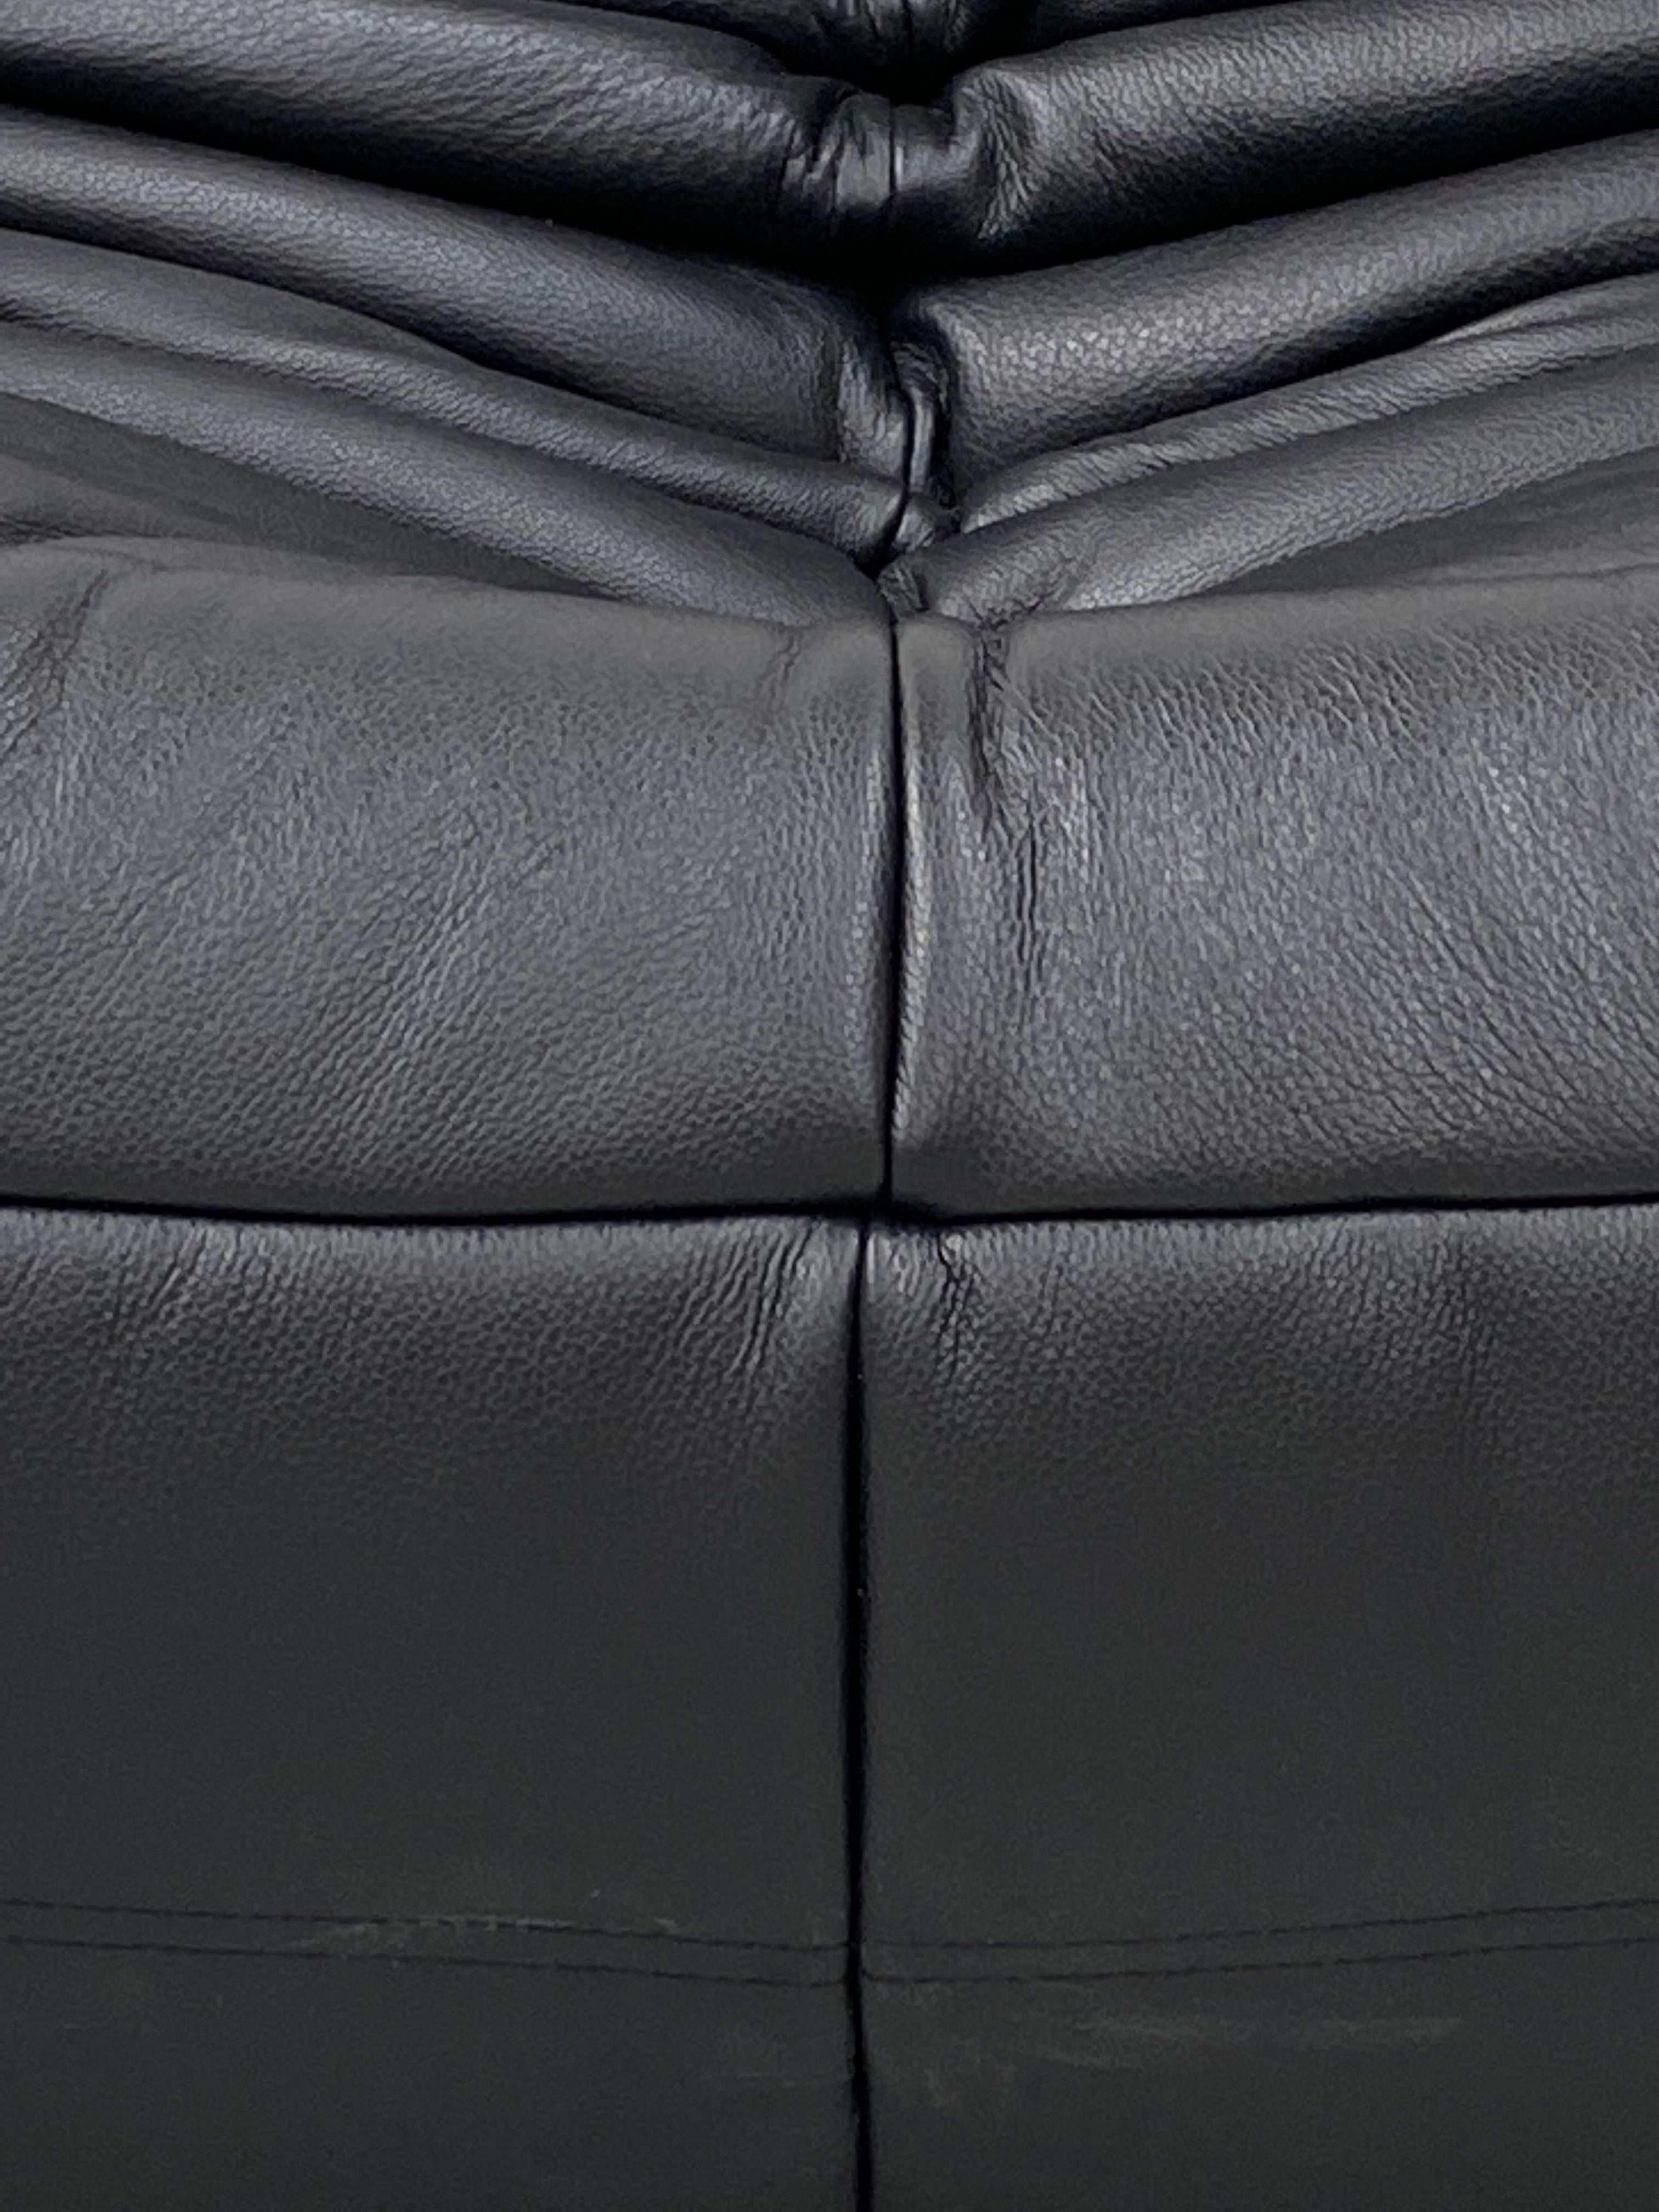 French Togo Chair in Black Leather by Michel Ducaroy for Ligne Roset. For Sale 6